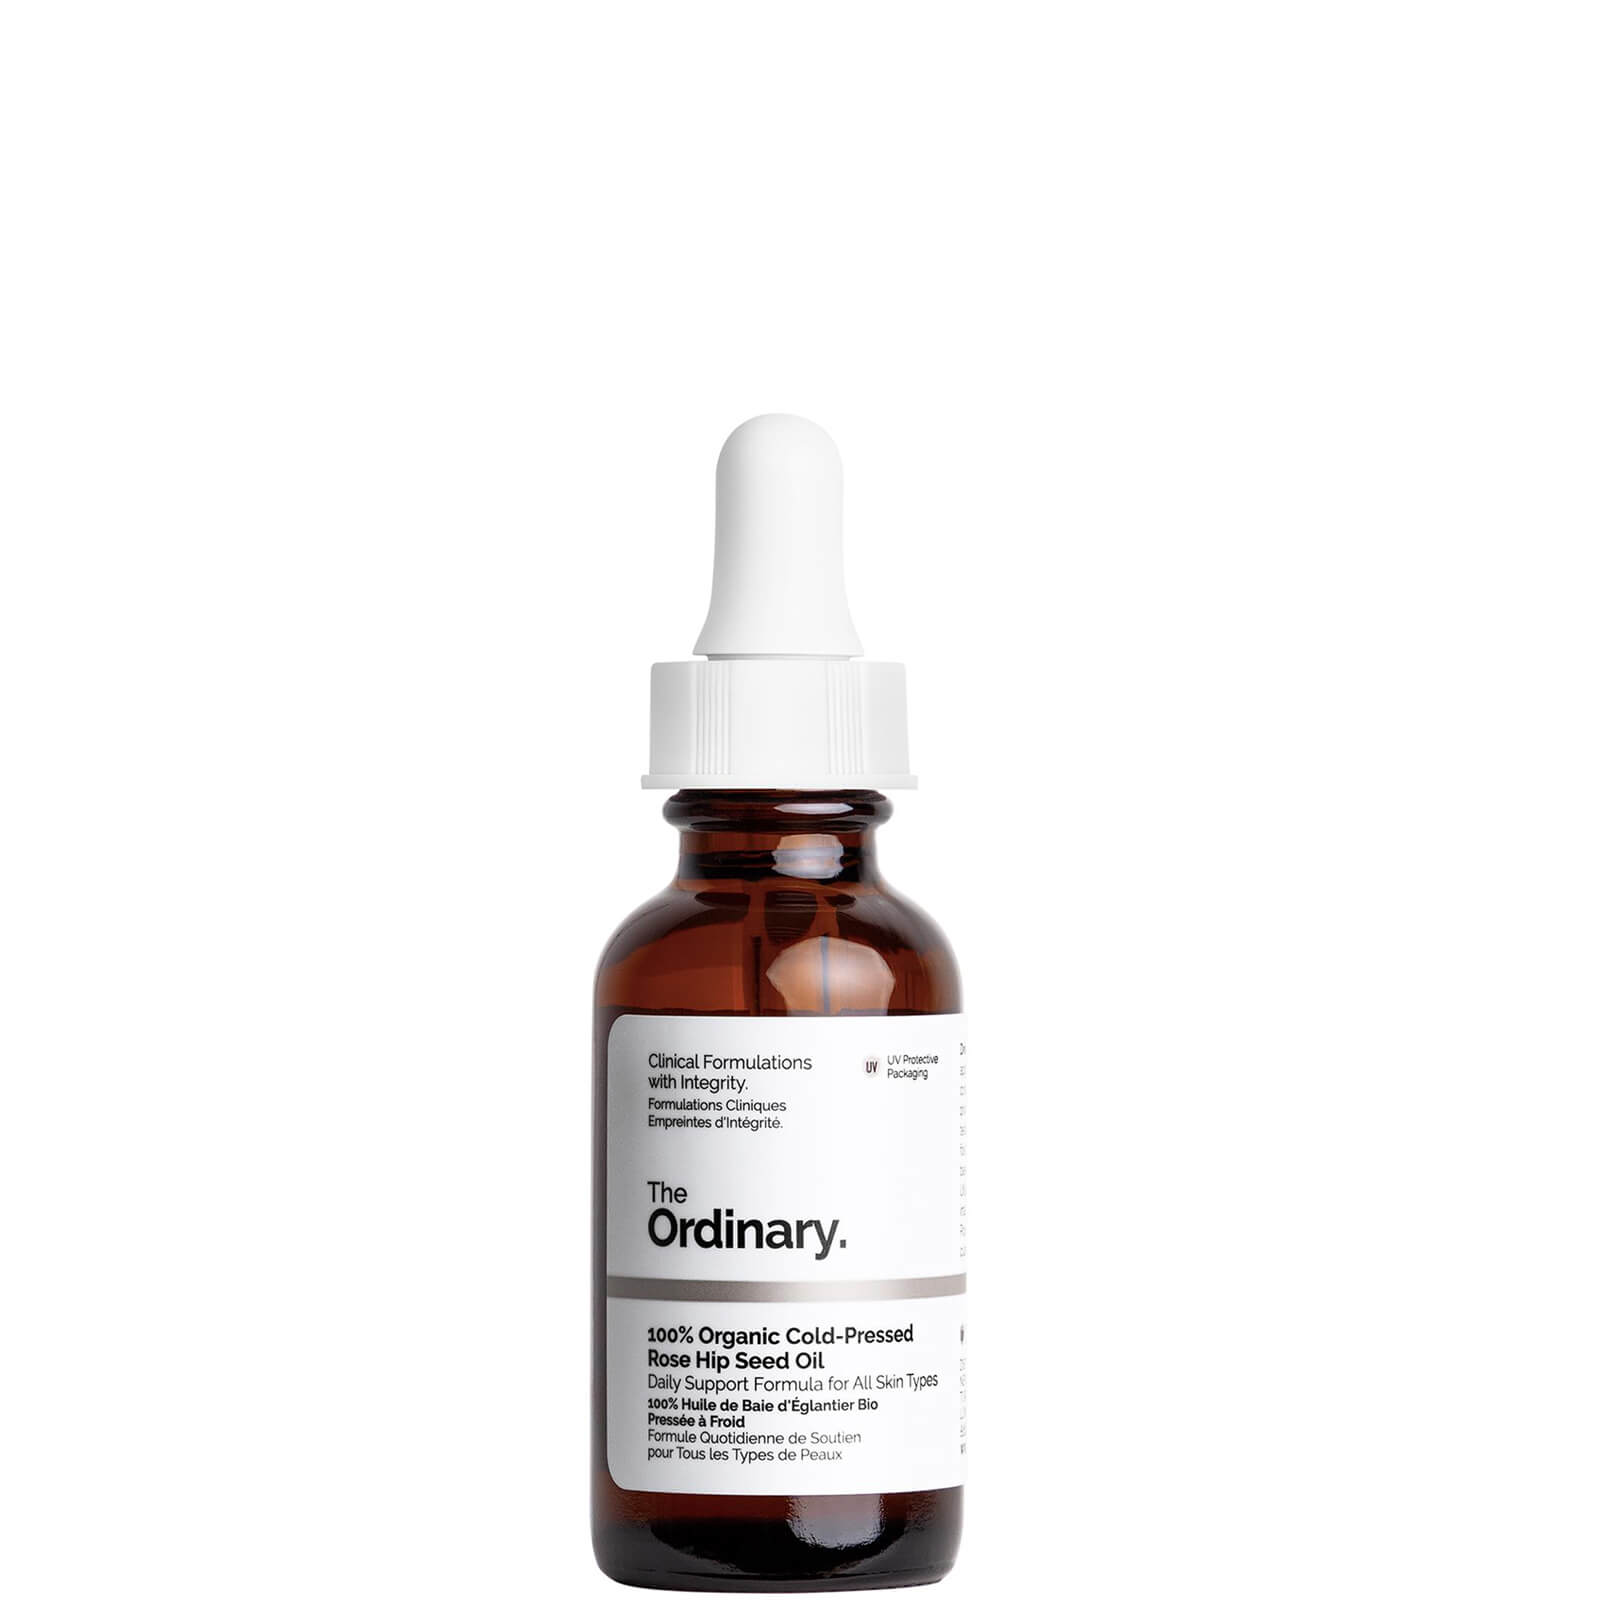 Photos - Cream / Lotion The Ordinary 100 Organic Cold-Pressed Rose Hip Seed Oil 30ml